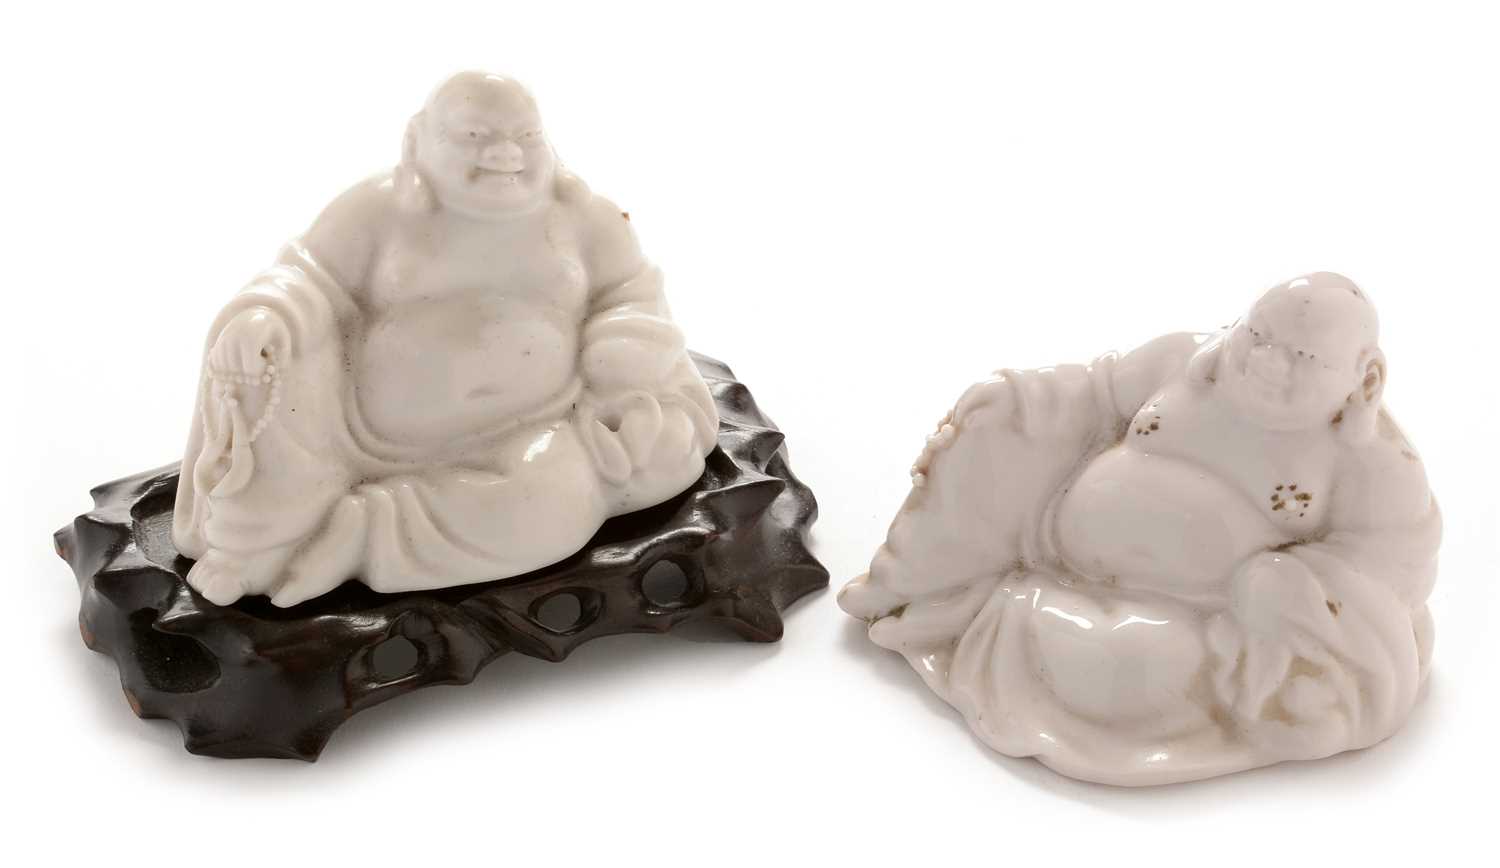 Lot 424 - Two Chinese Blanc de chine figures of Putai